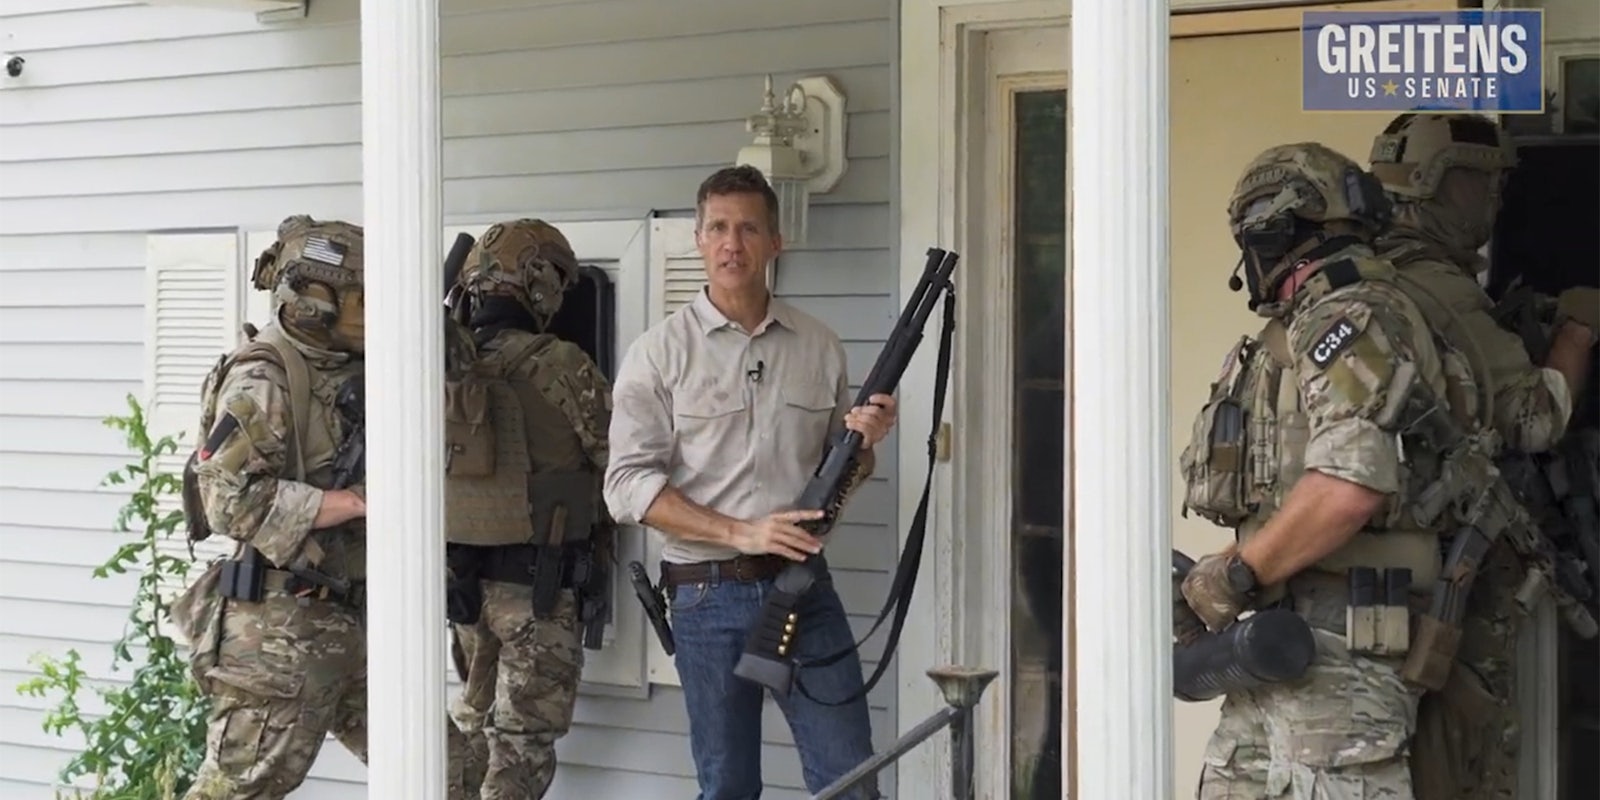 men with weapons on porch preparing to breach door with 'Greitens US SENATE' logo